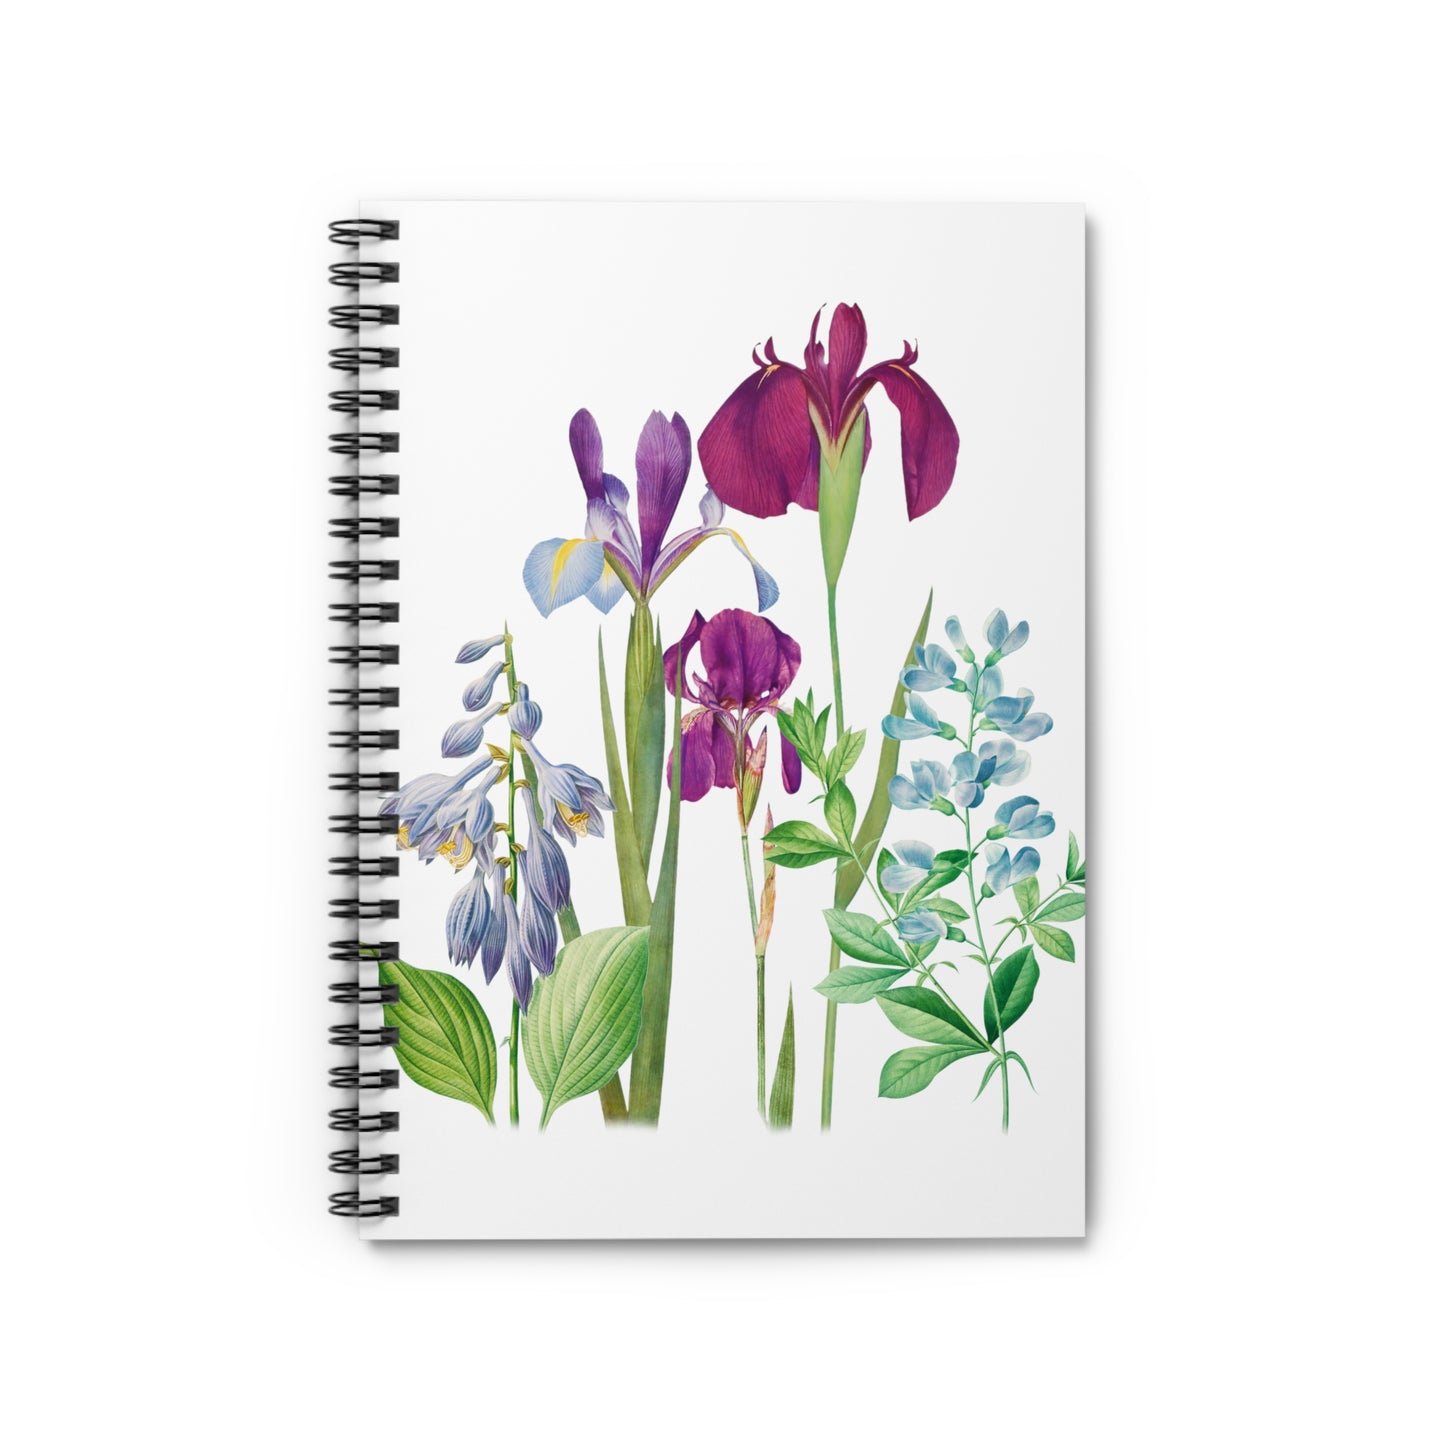 Vintage Style Watercolor Flowers - Spiral Notebook - Ruled Line